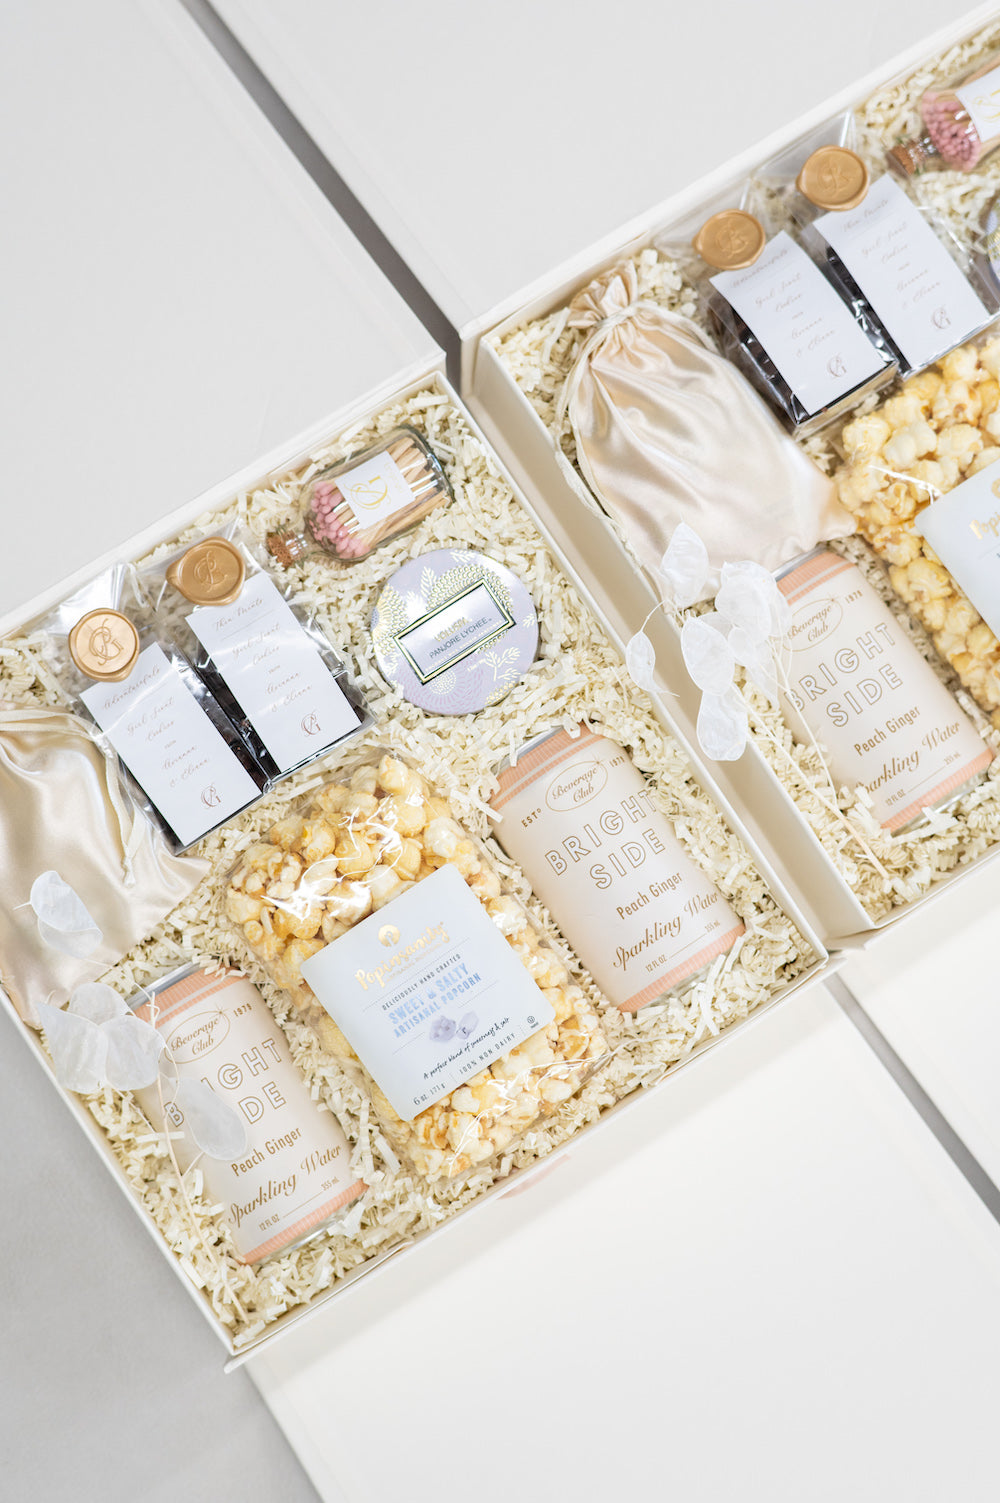 Elegant Blush Pink, Ivory & Gold Wedding Welcome Gifts for Out of Town Hotel Guests by Marigold & Grey